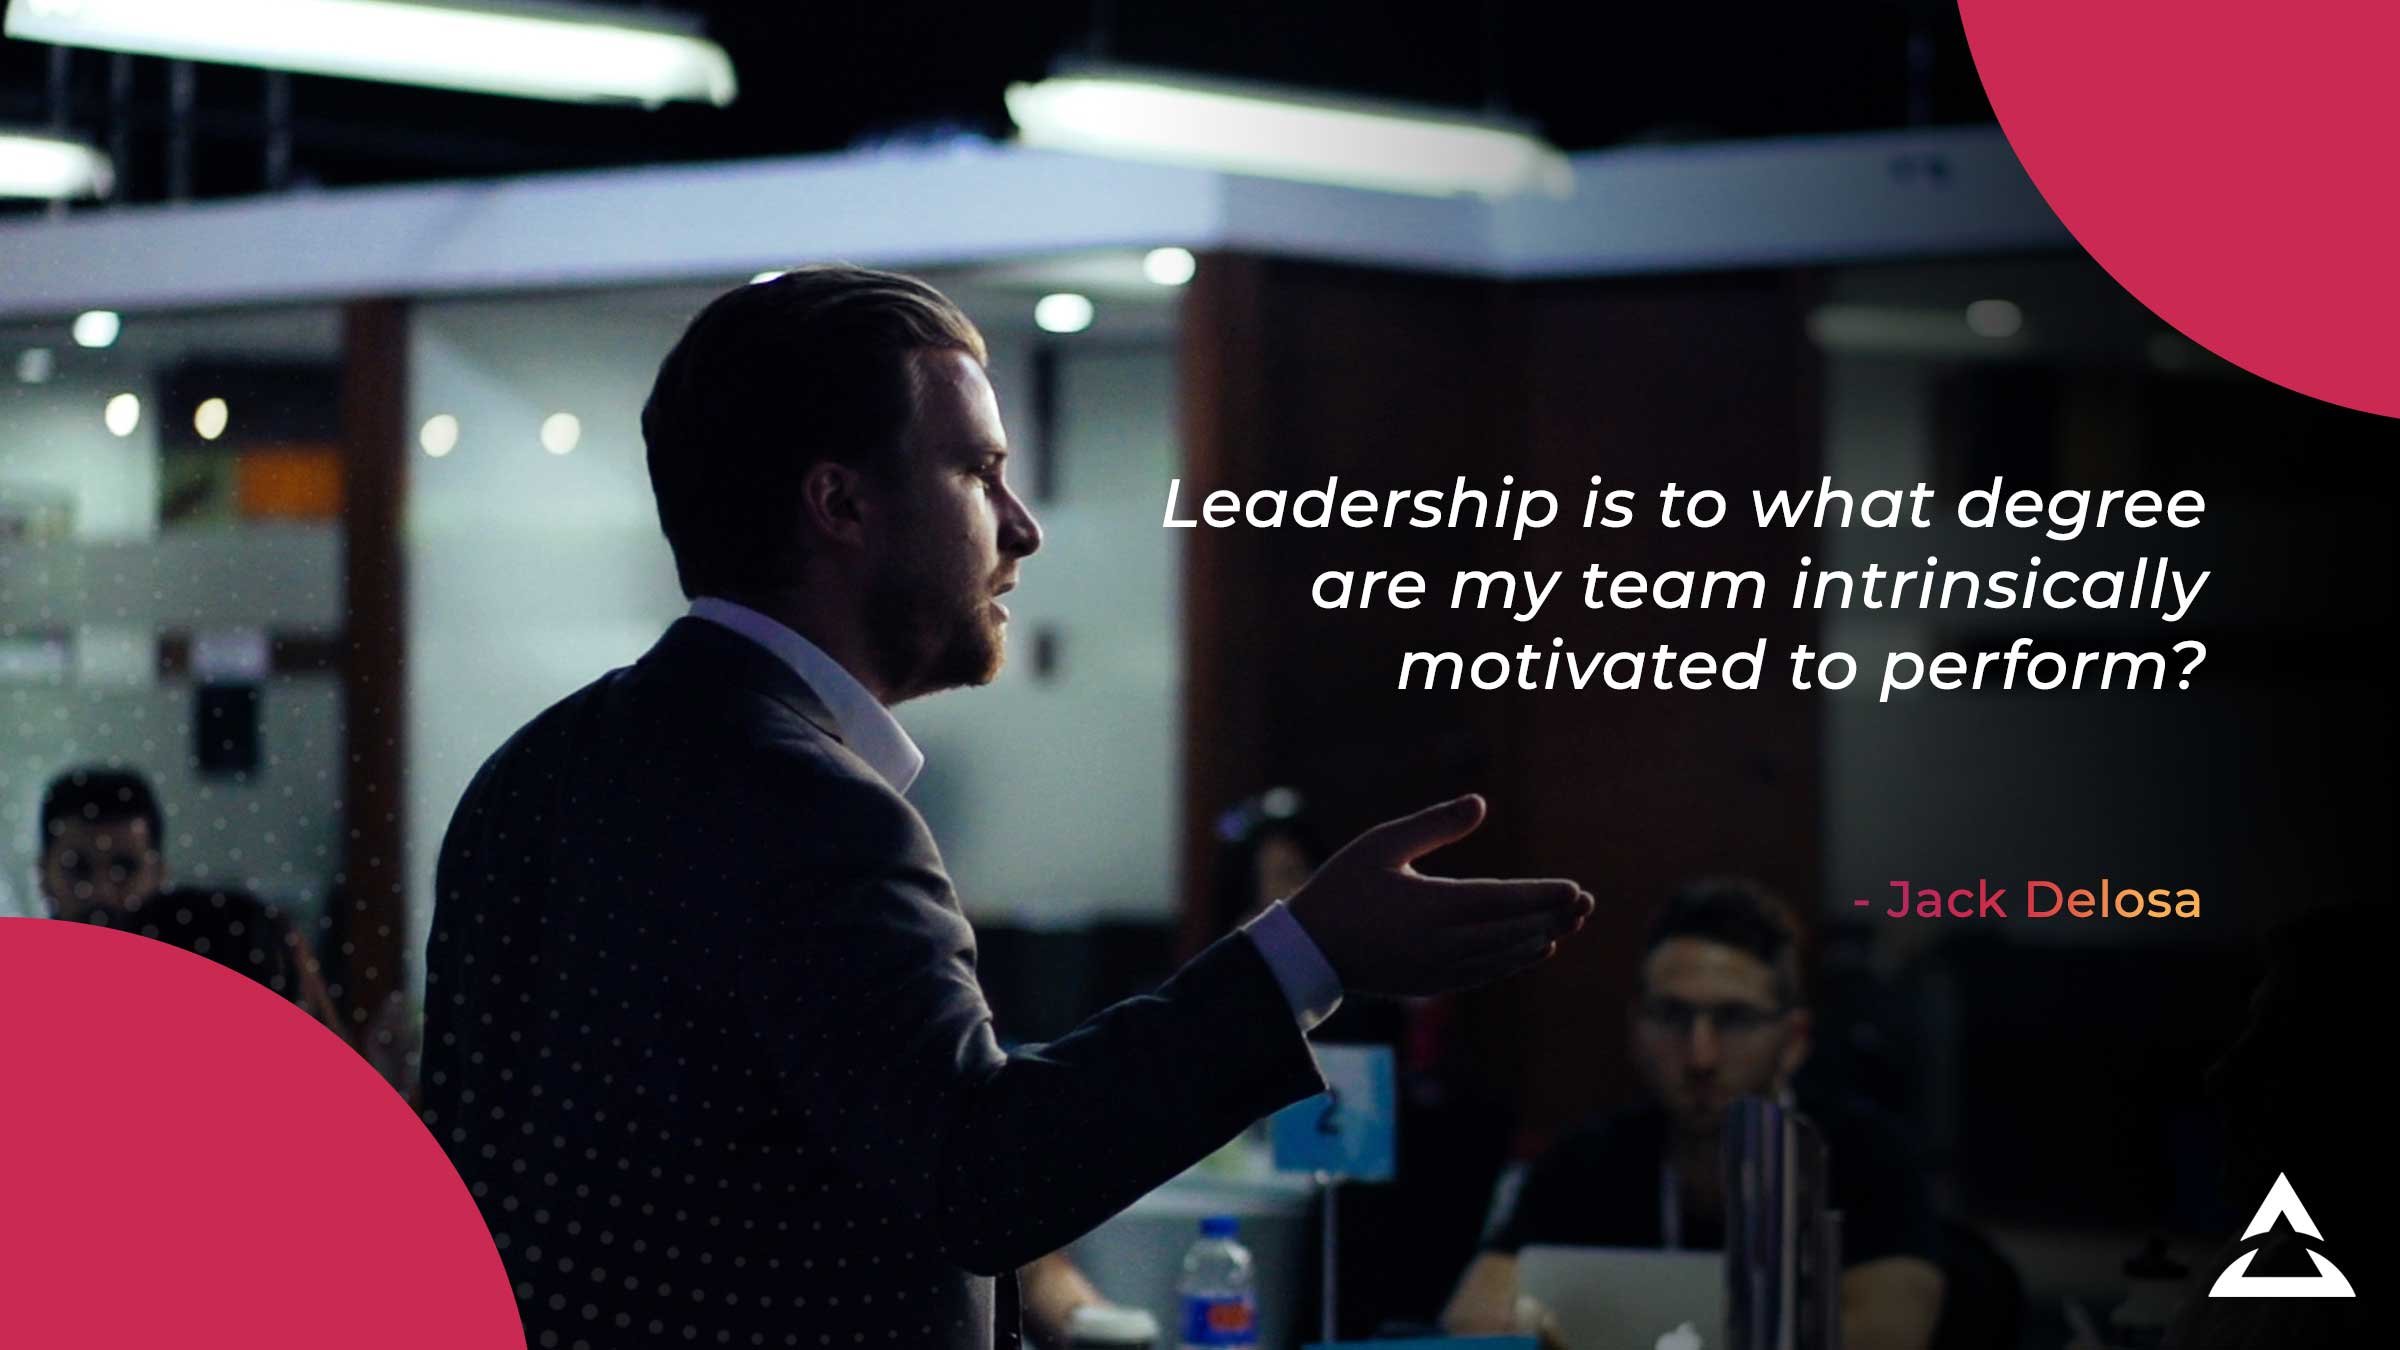 Leadership is to what degree are my team intrinsically motivated to perform? Jack Delosa, The Entourage